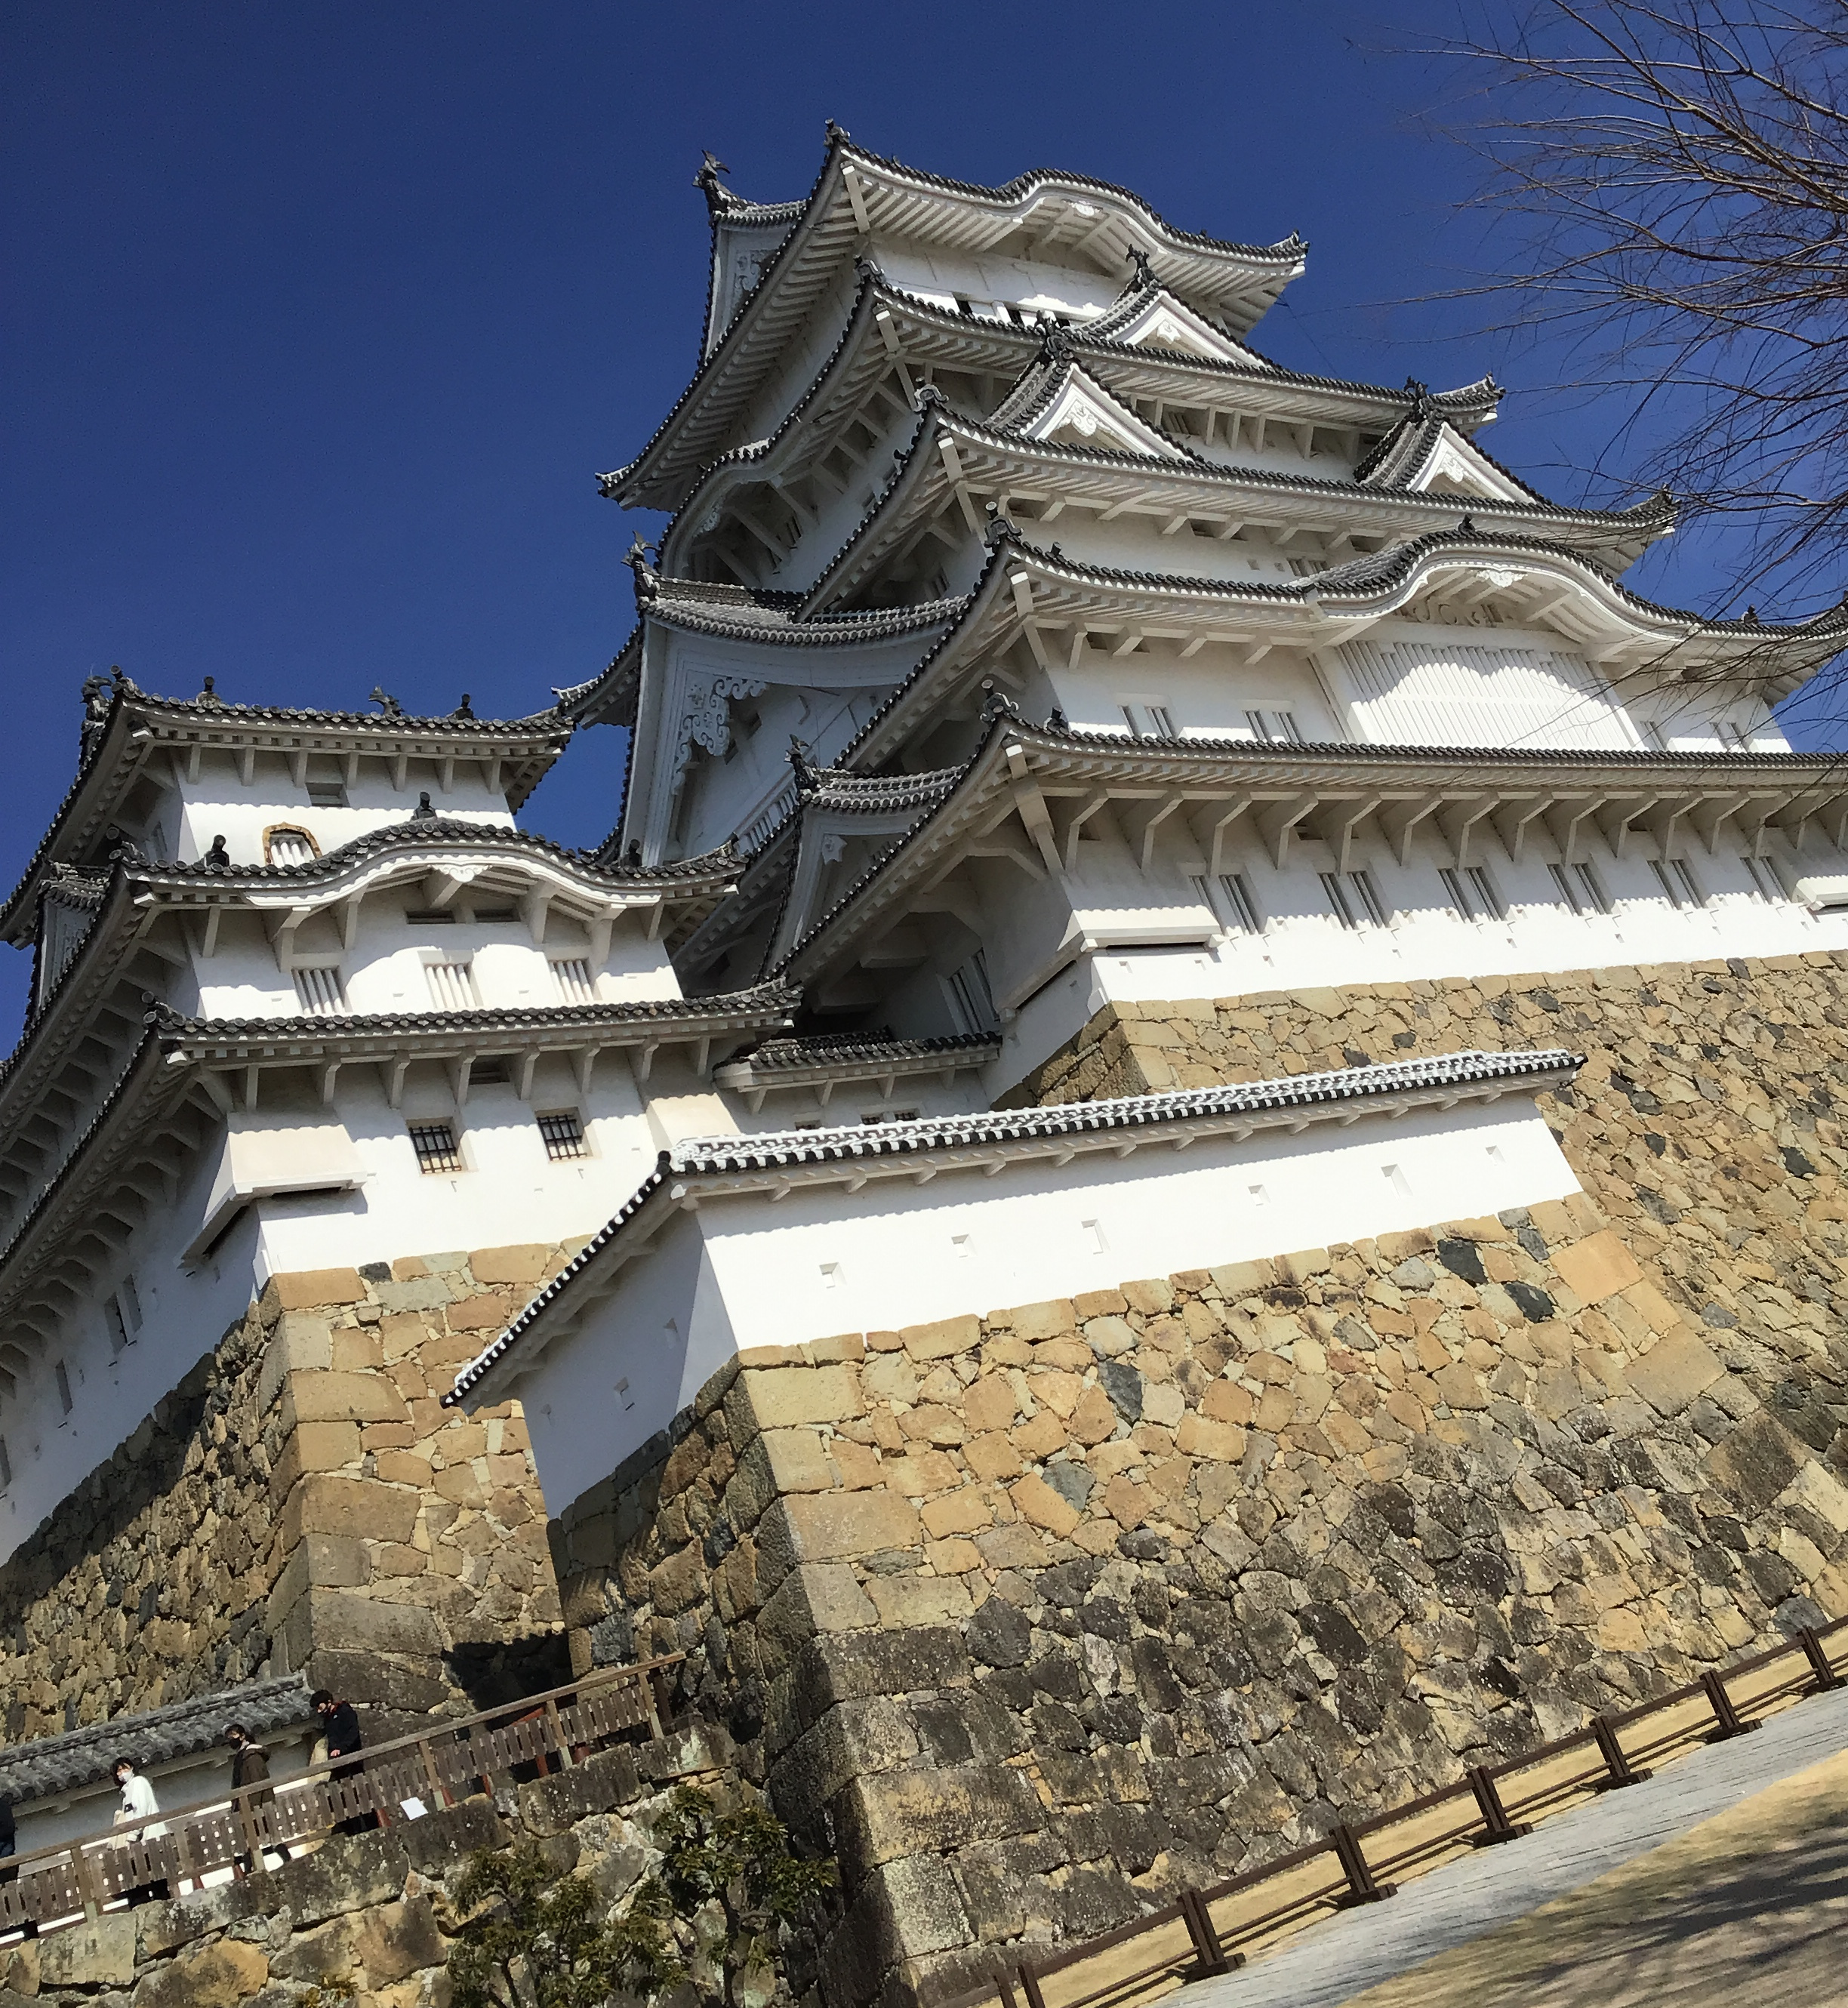 The central keep of Himeji Castle